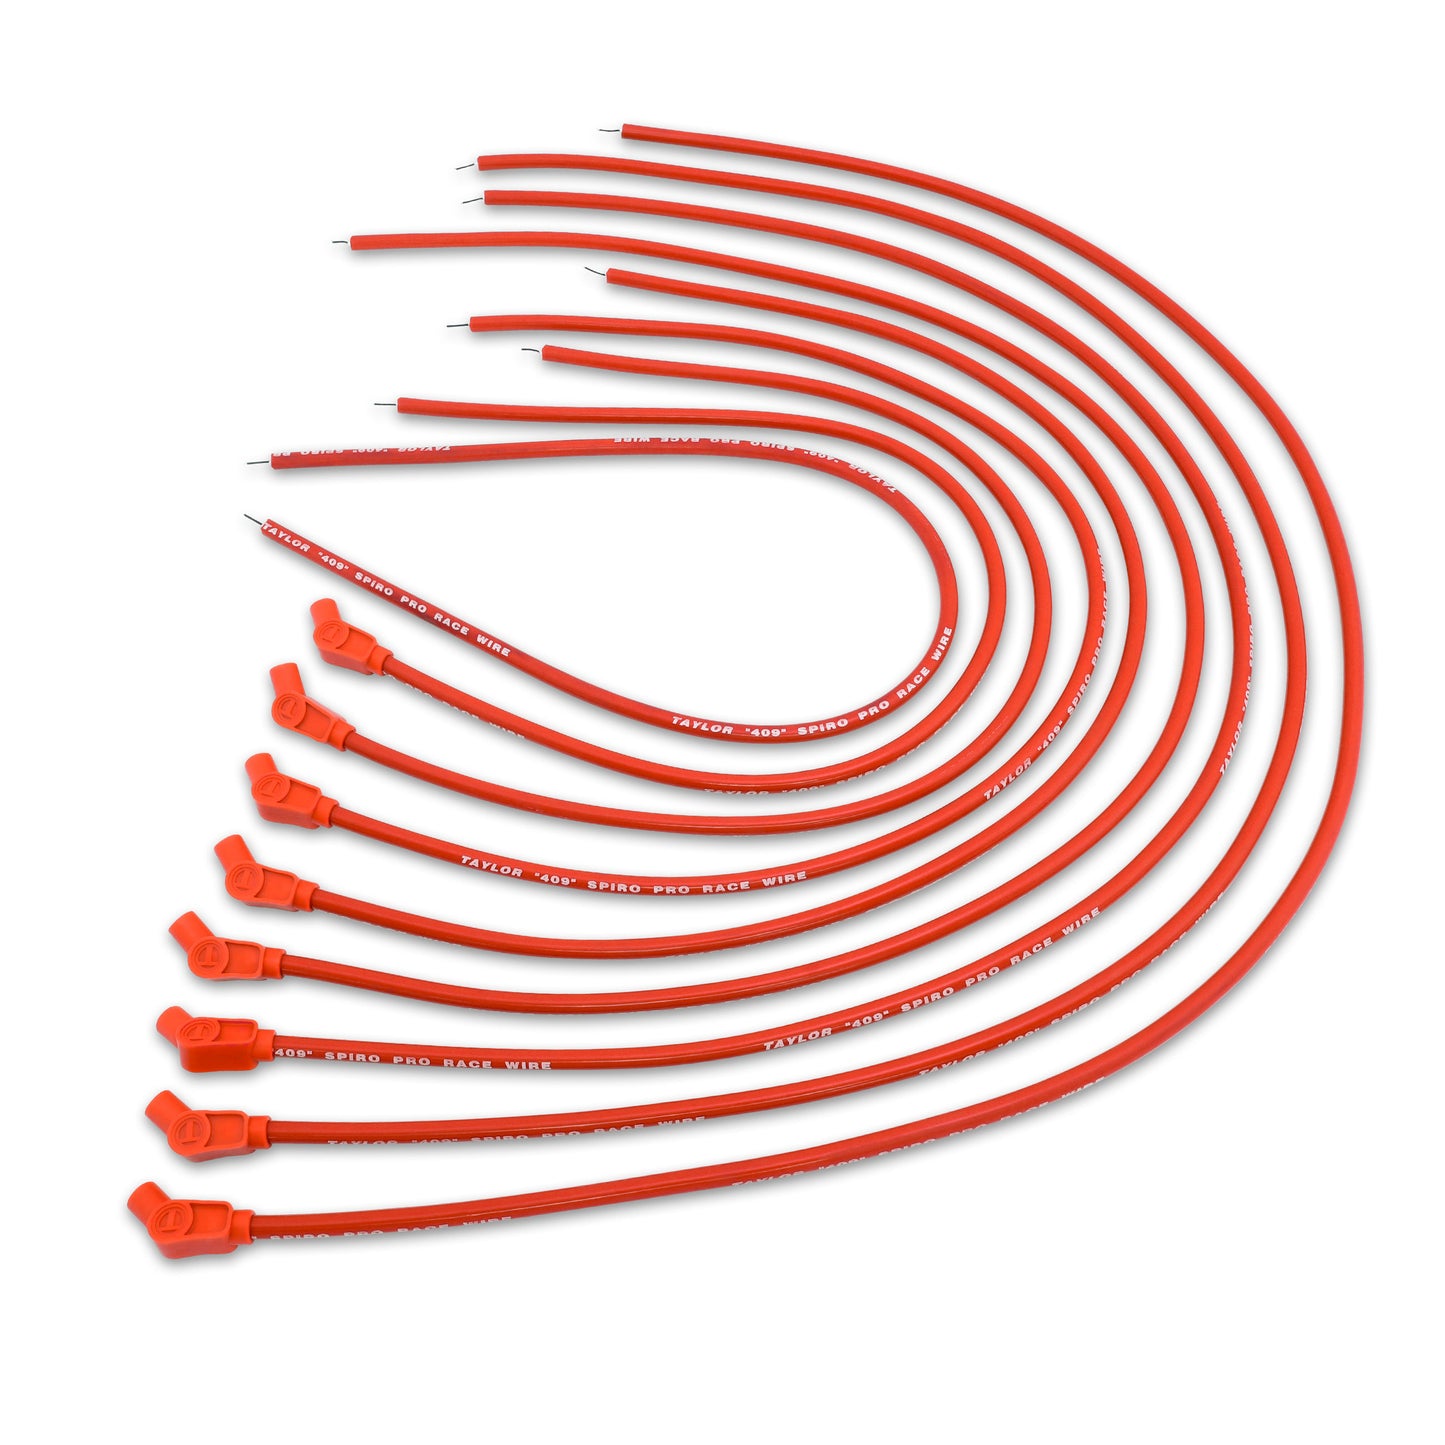 Taylor Cable 79253 10.4mm 409 Spiro-Pro Ignition Wires univ 8 cyl 135 red